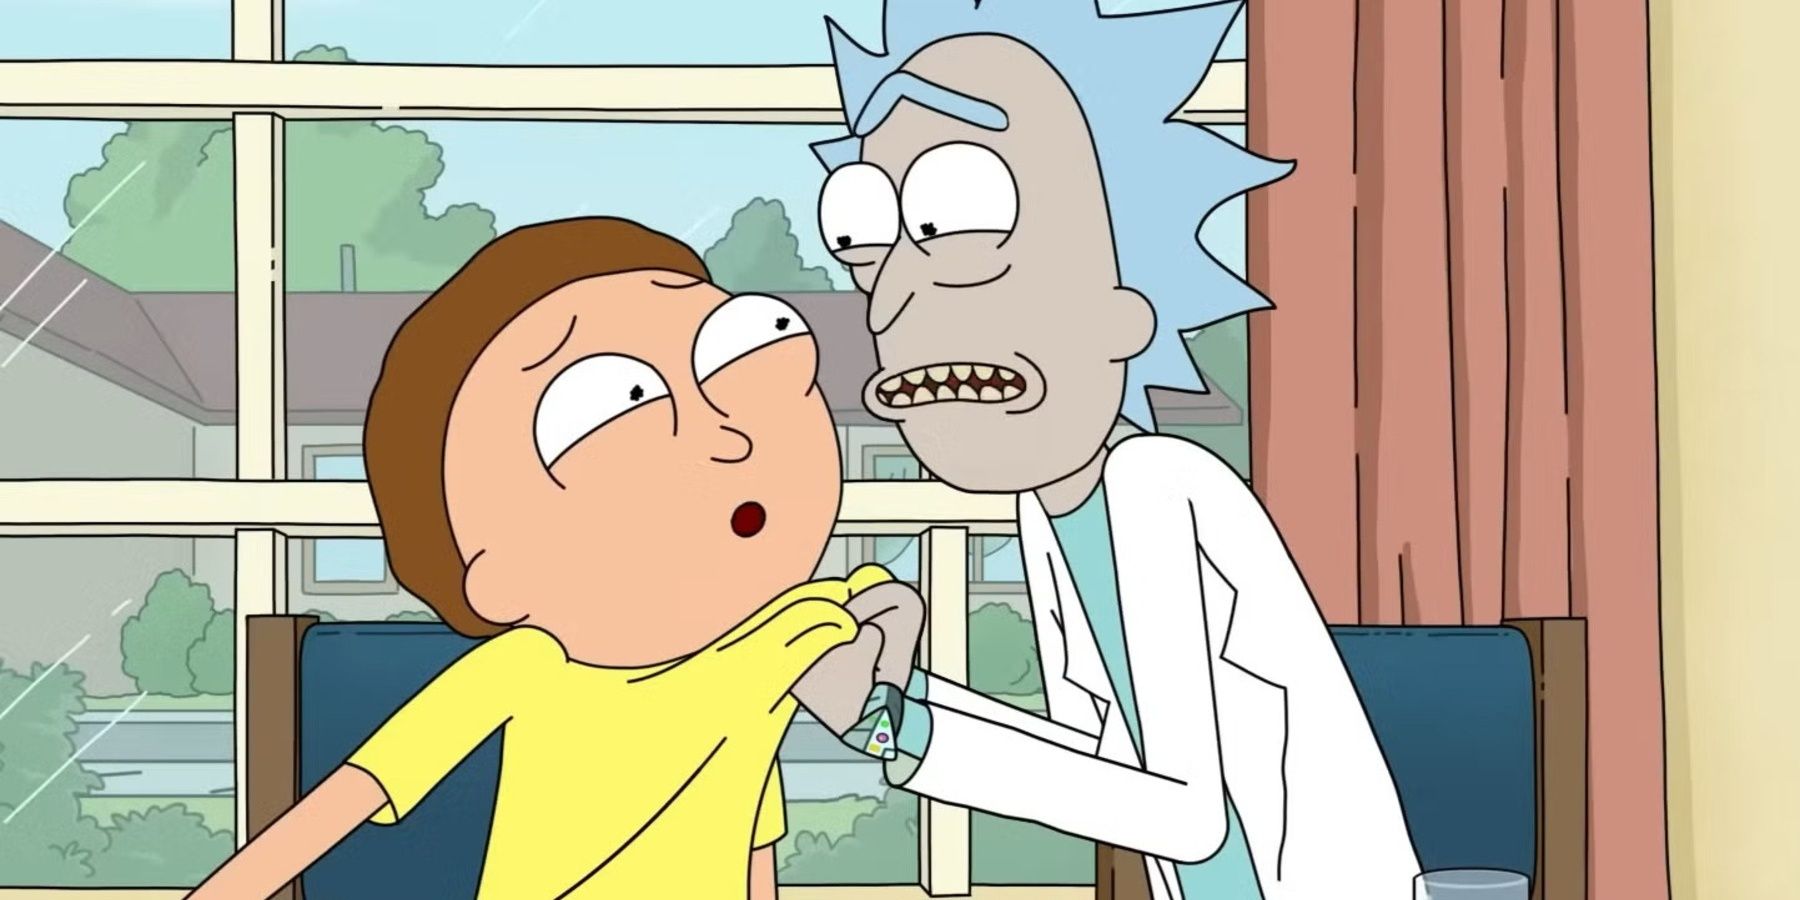 Rick Grabs Morty by his shirt in the Smith House